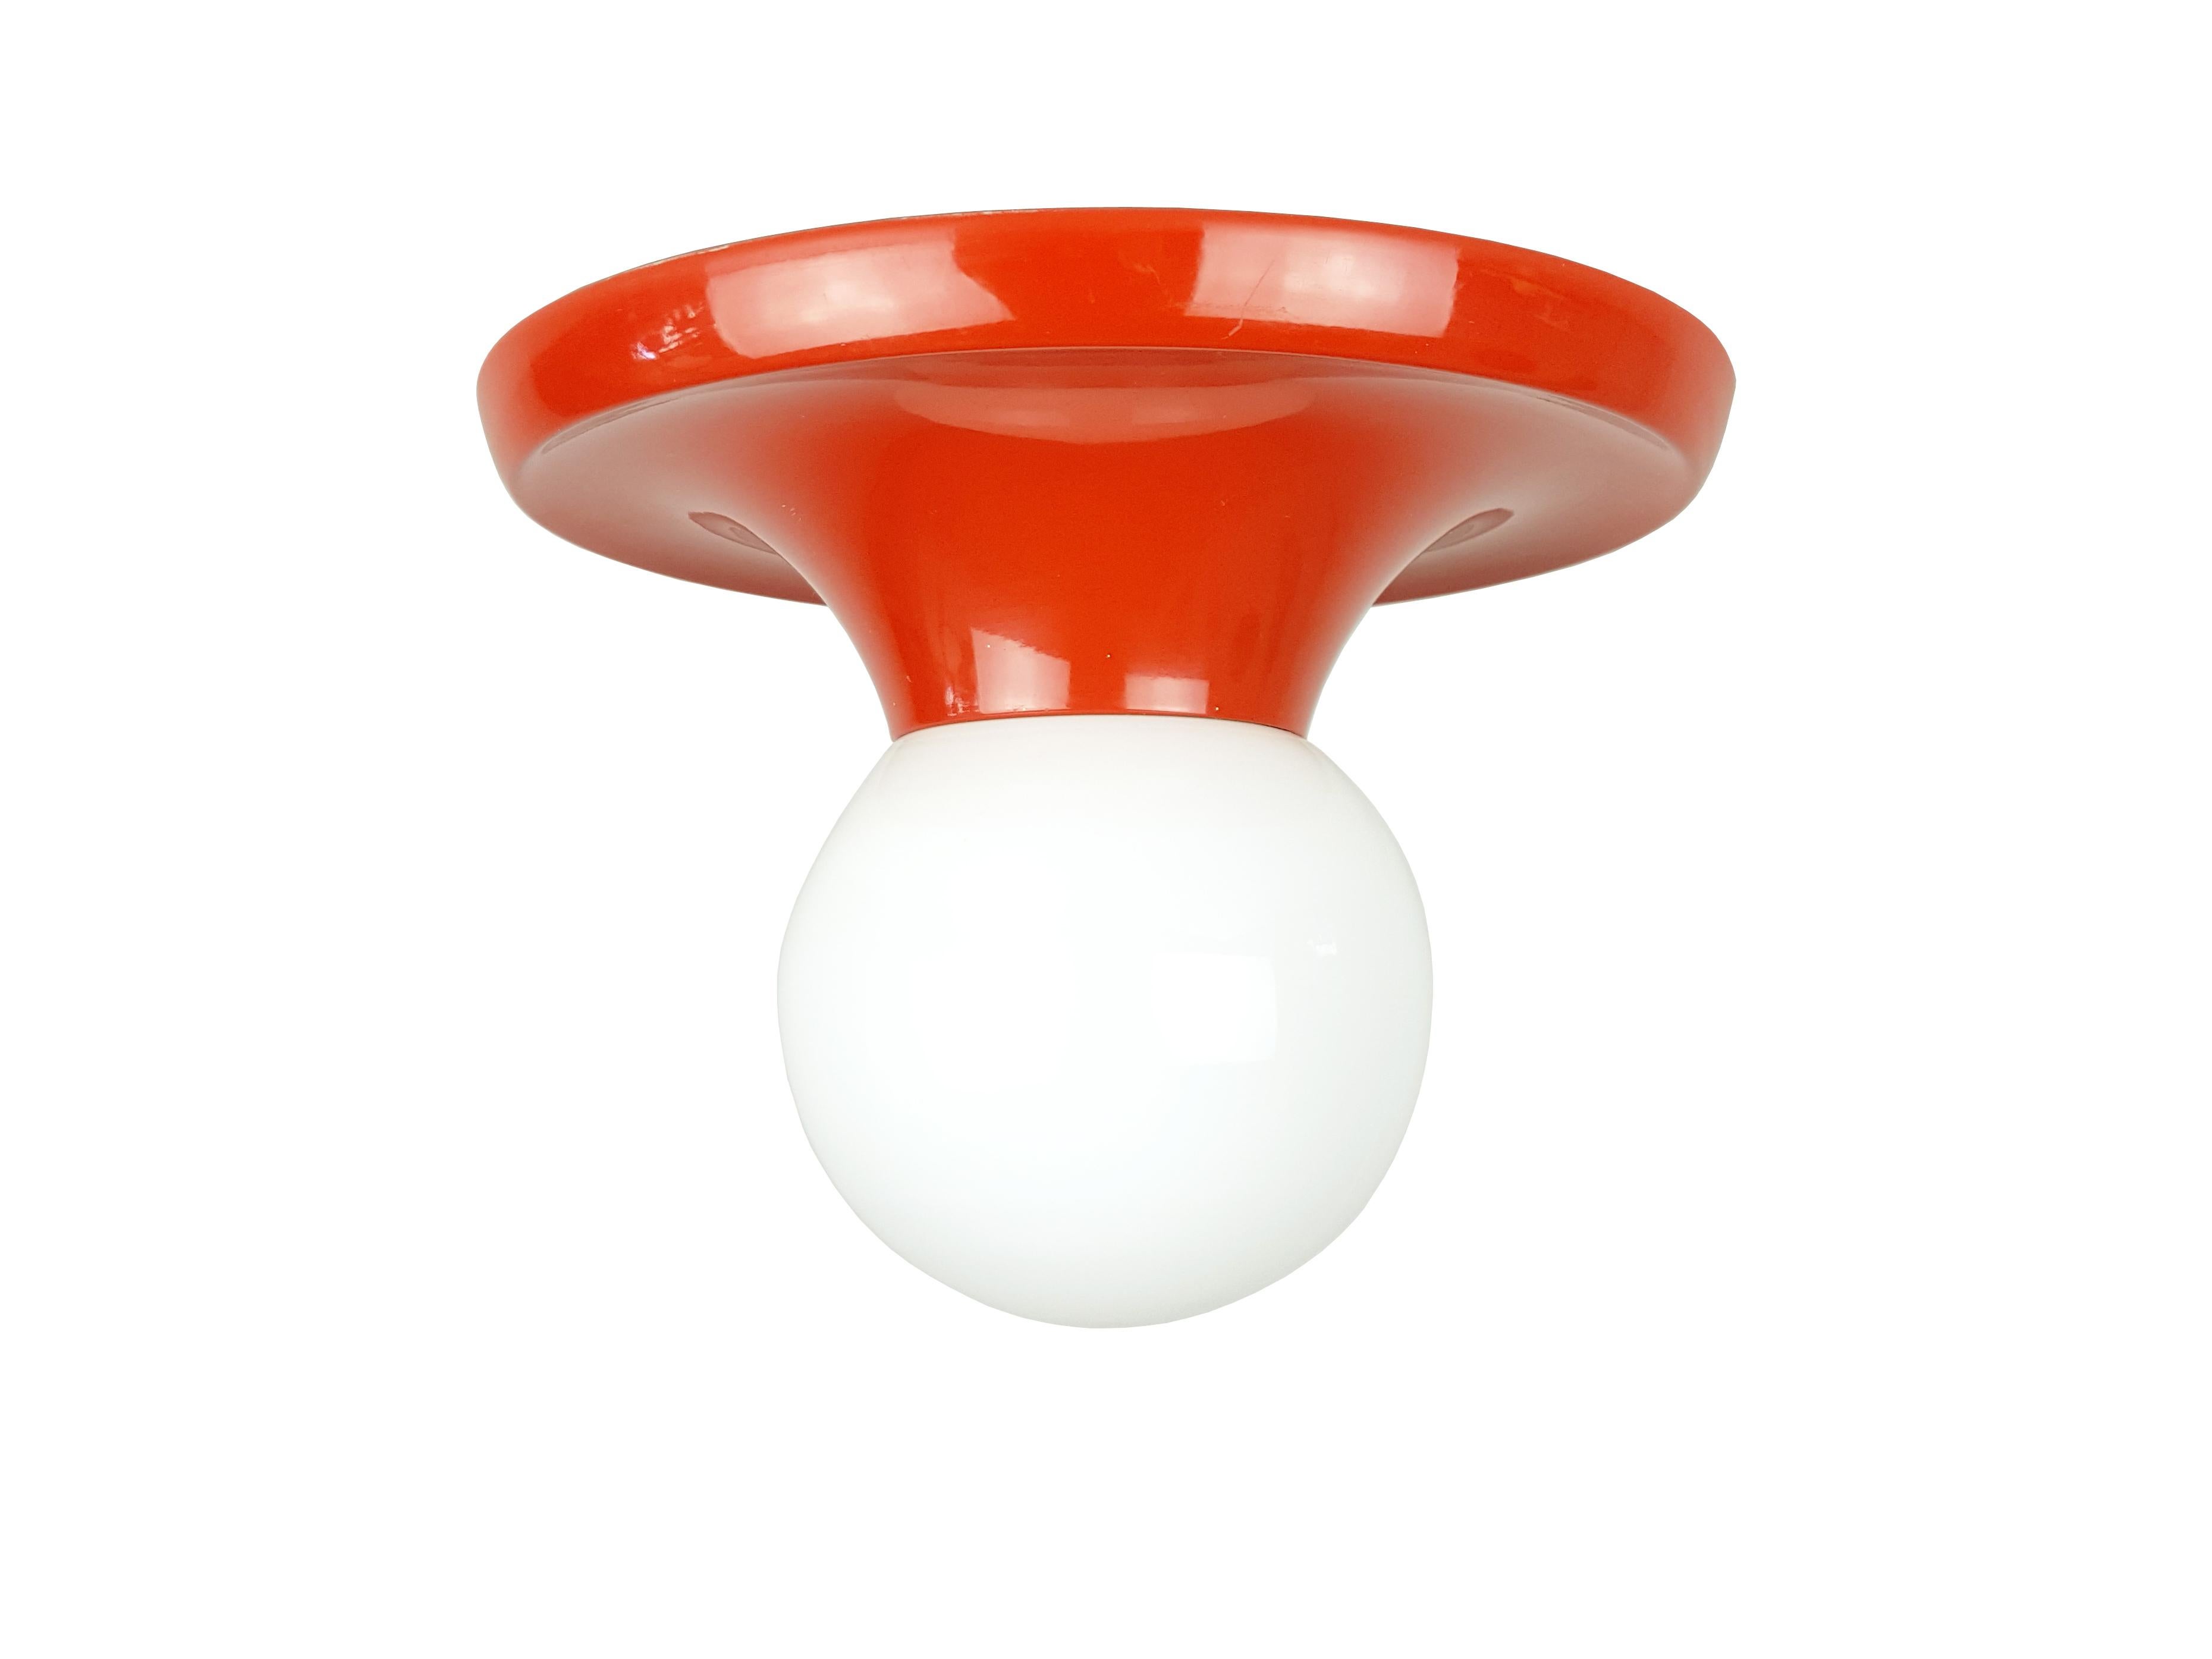 Small version of the Light ball serie designed in 1961 by Achille Castiglioni and Pier Giacomo Castiglioni for Arteluce and subsequently for Flos.